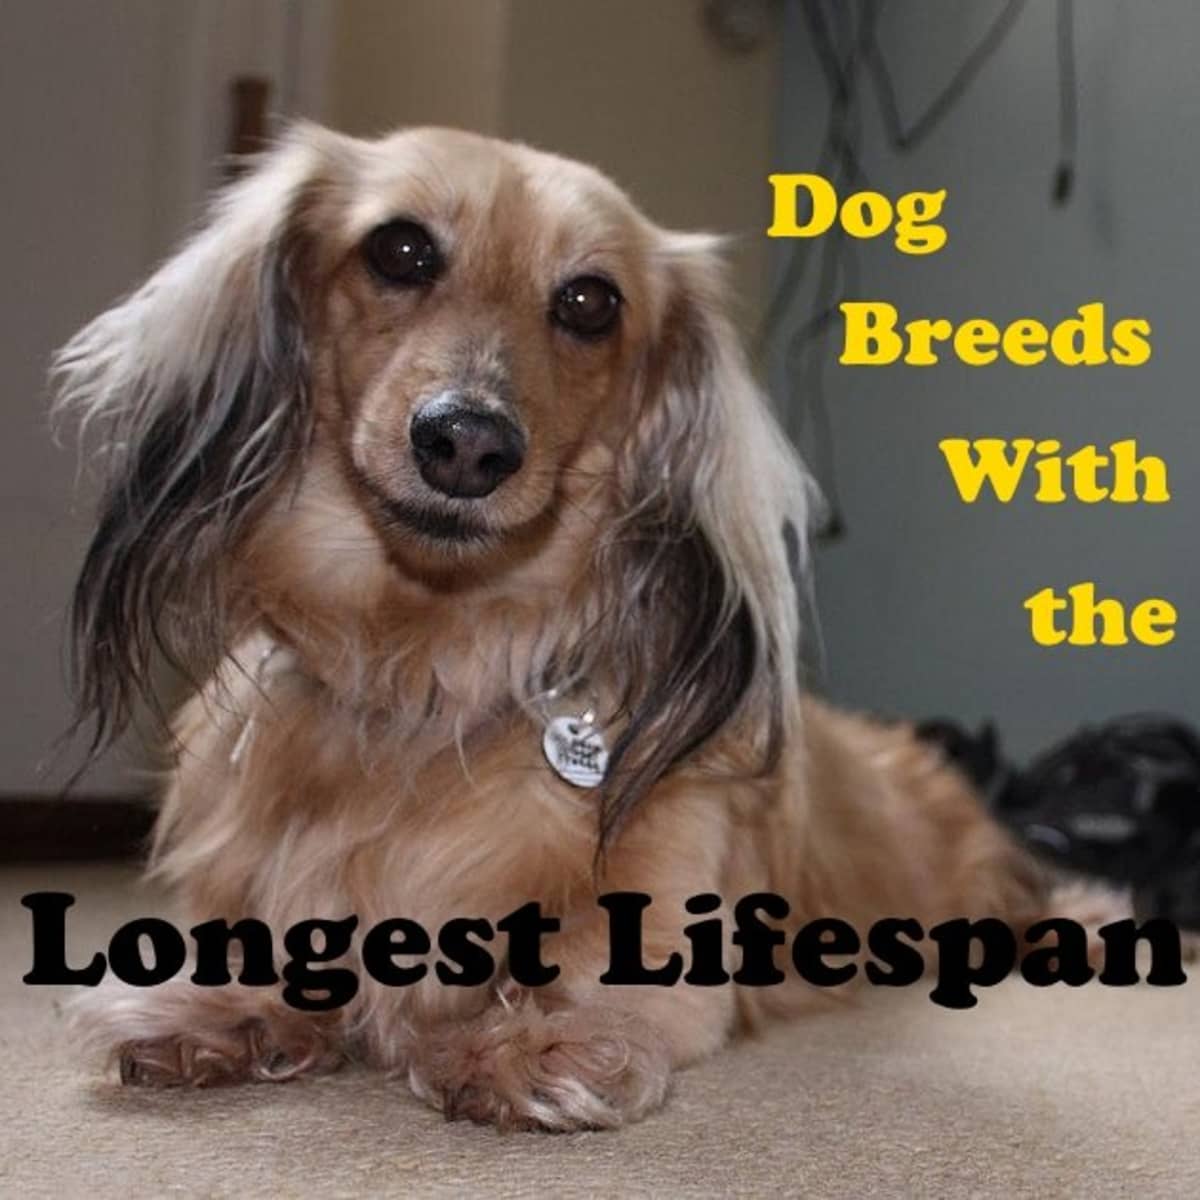 5 Dog Breeds With the Longest Life Expectancy - PetHelpful